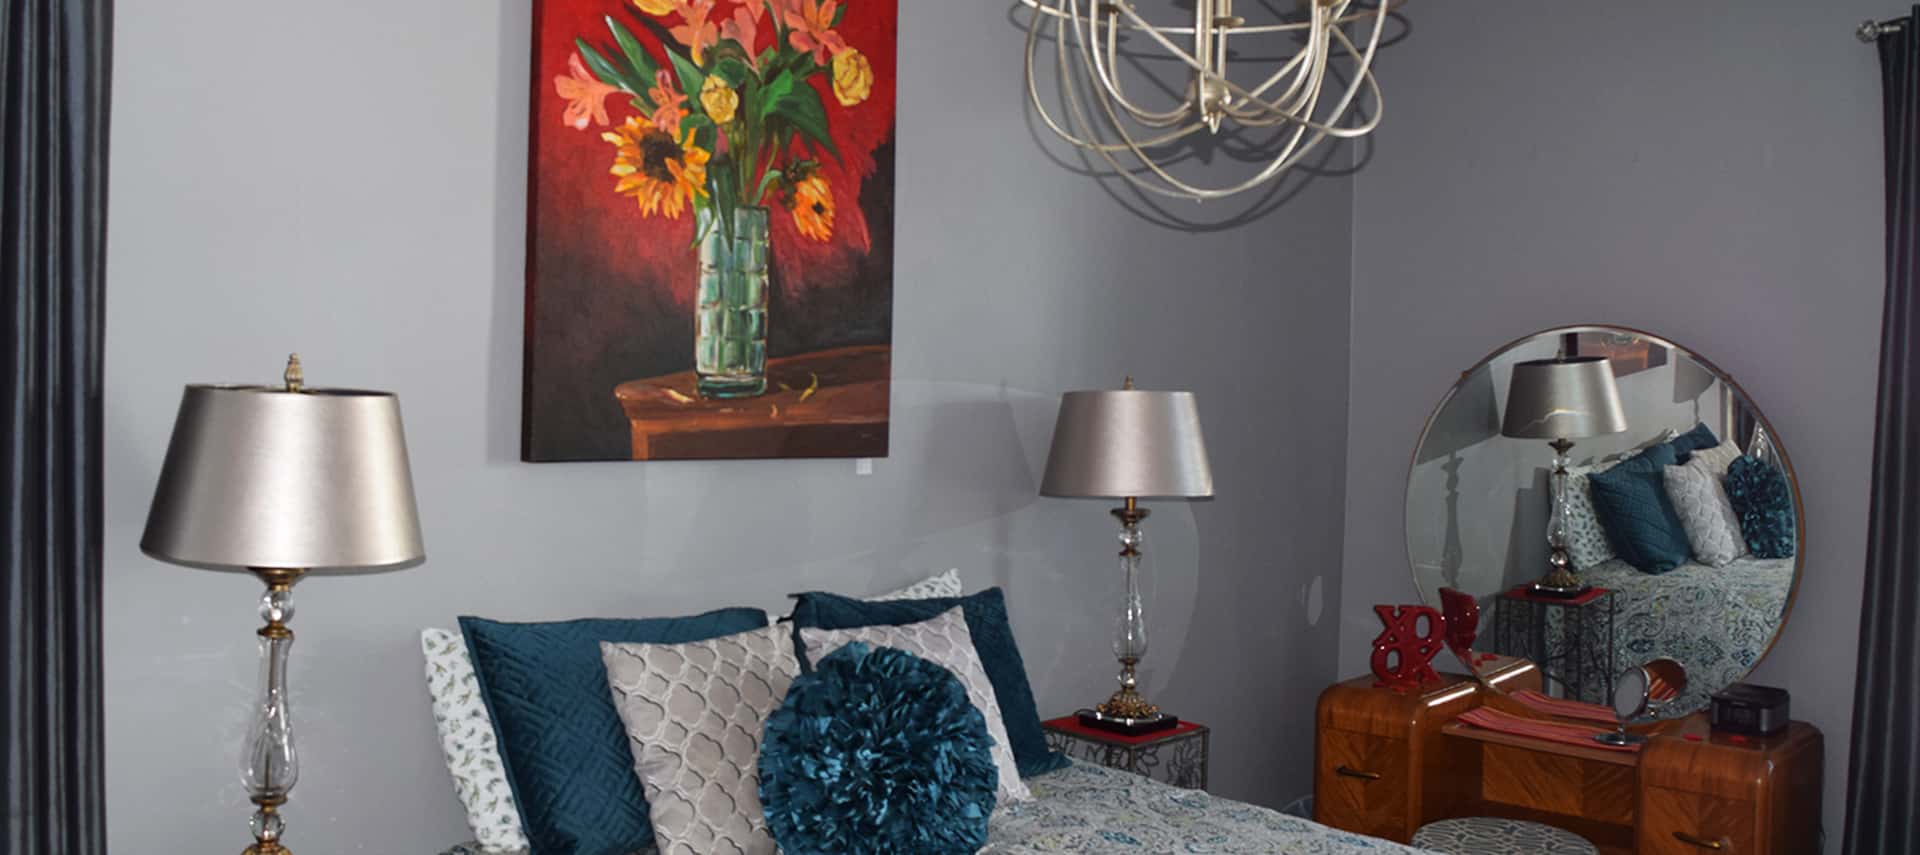 Bedroom with grey walls with a red painting of a vase of flowers, a bed with a patterned bedspread and blue and white pillows, a silver lamp on a nightstand, and a metal chandelier.